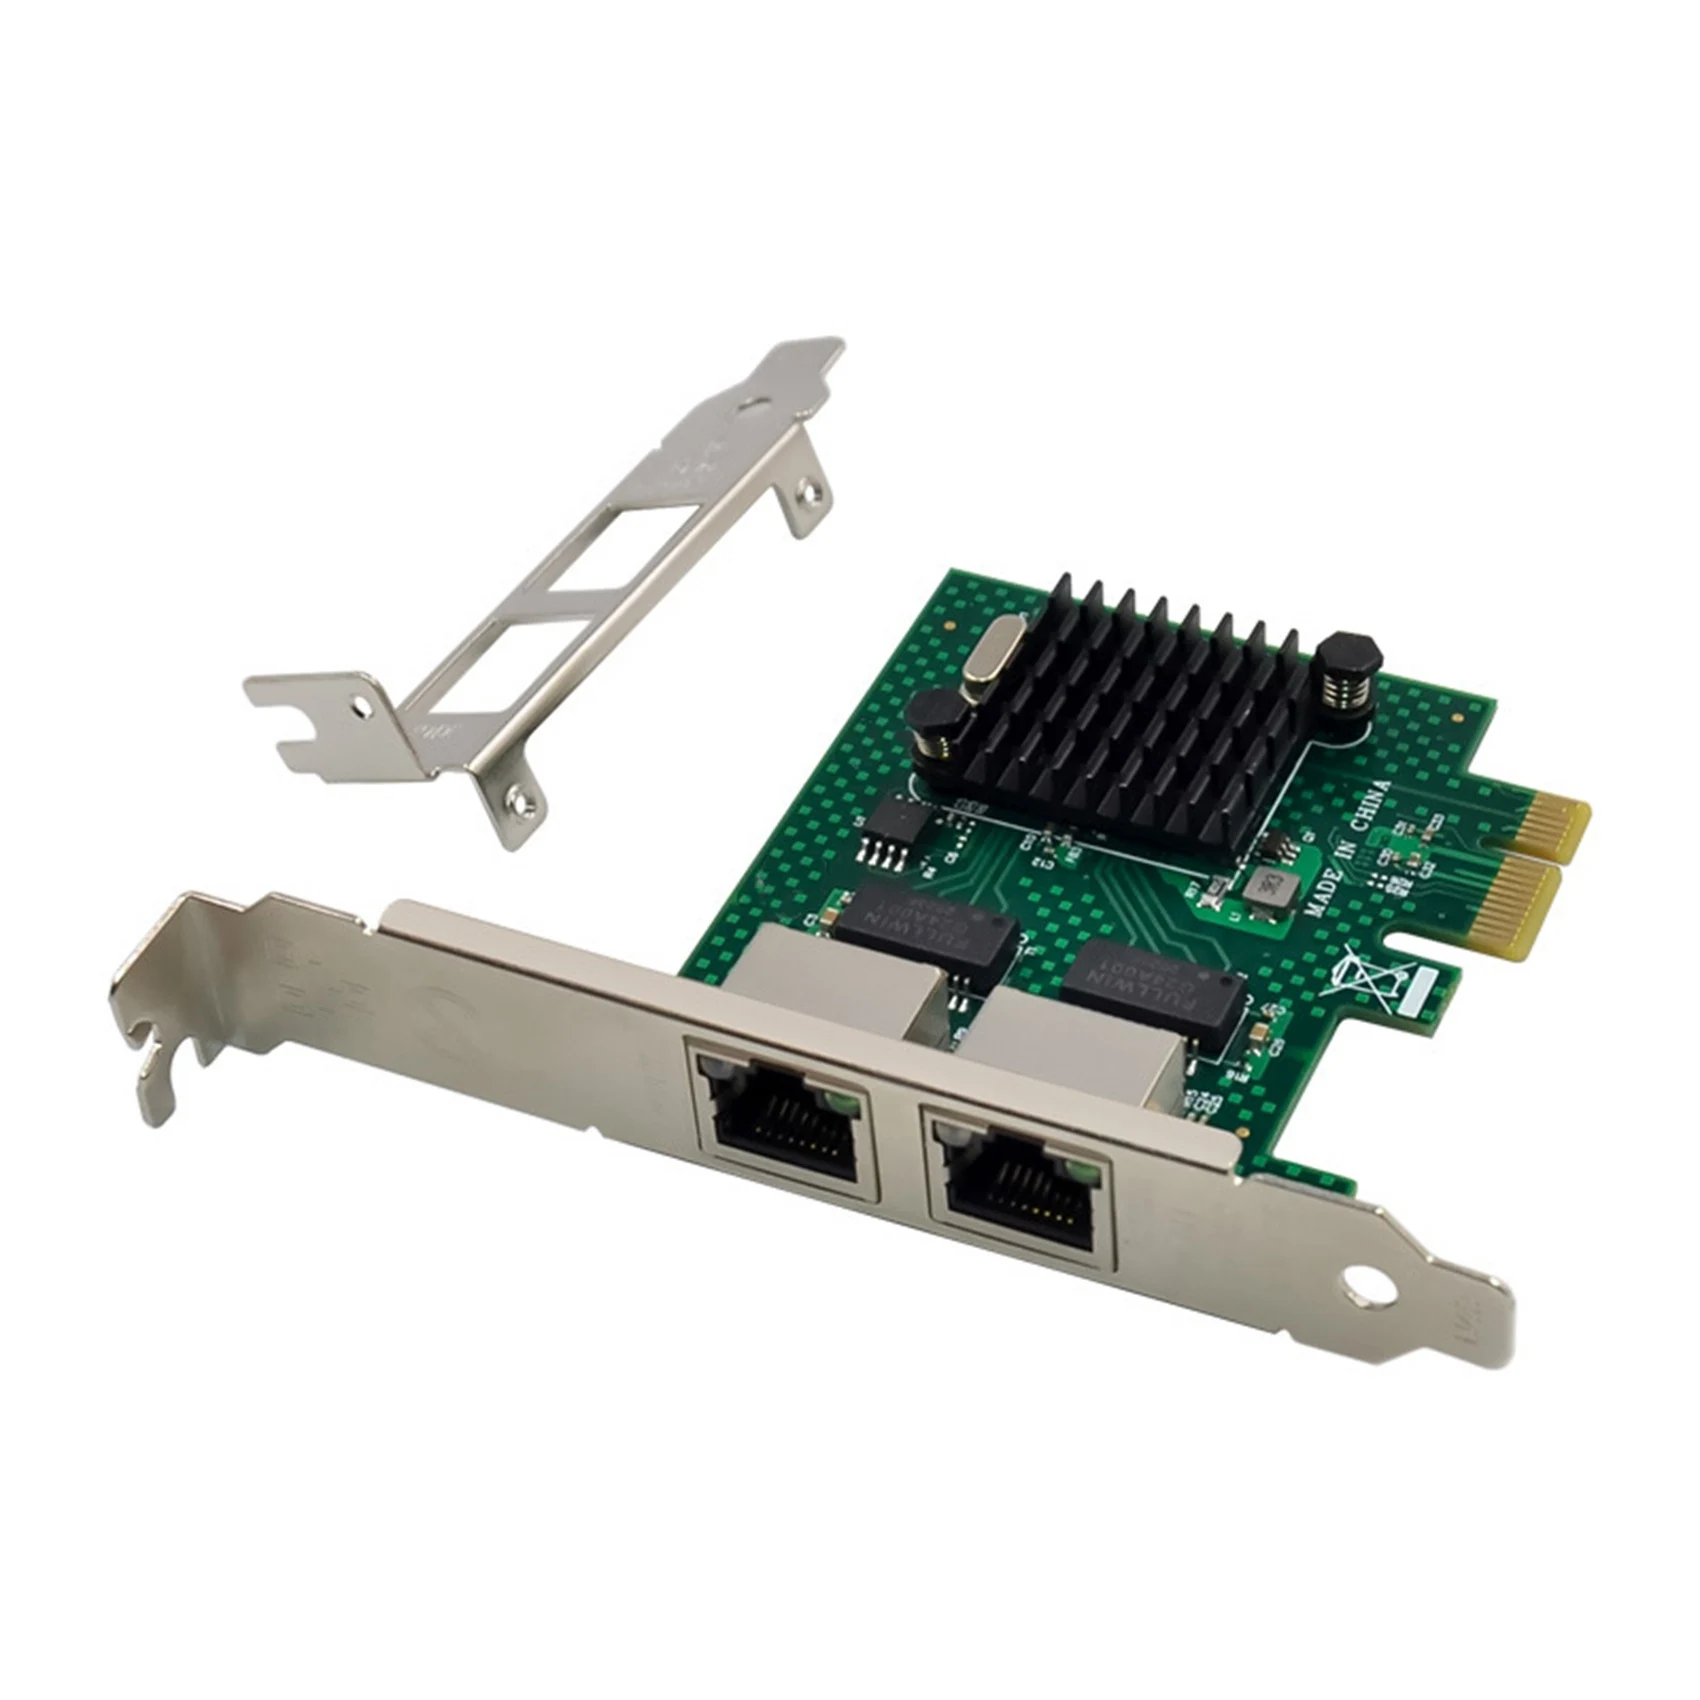 

BCM5718 Gigabit Server Network Card PCI Express X1 Dual Port Network Adapter Card Compatible with WOL PXE VLAN